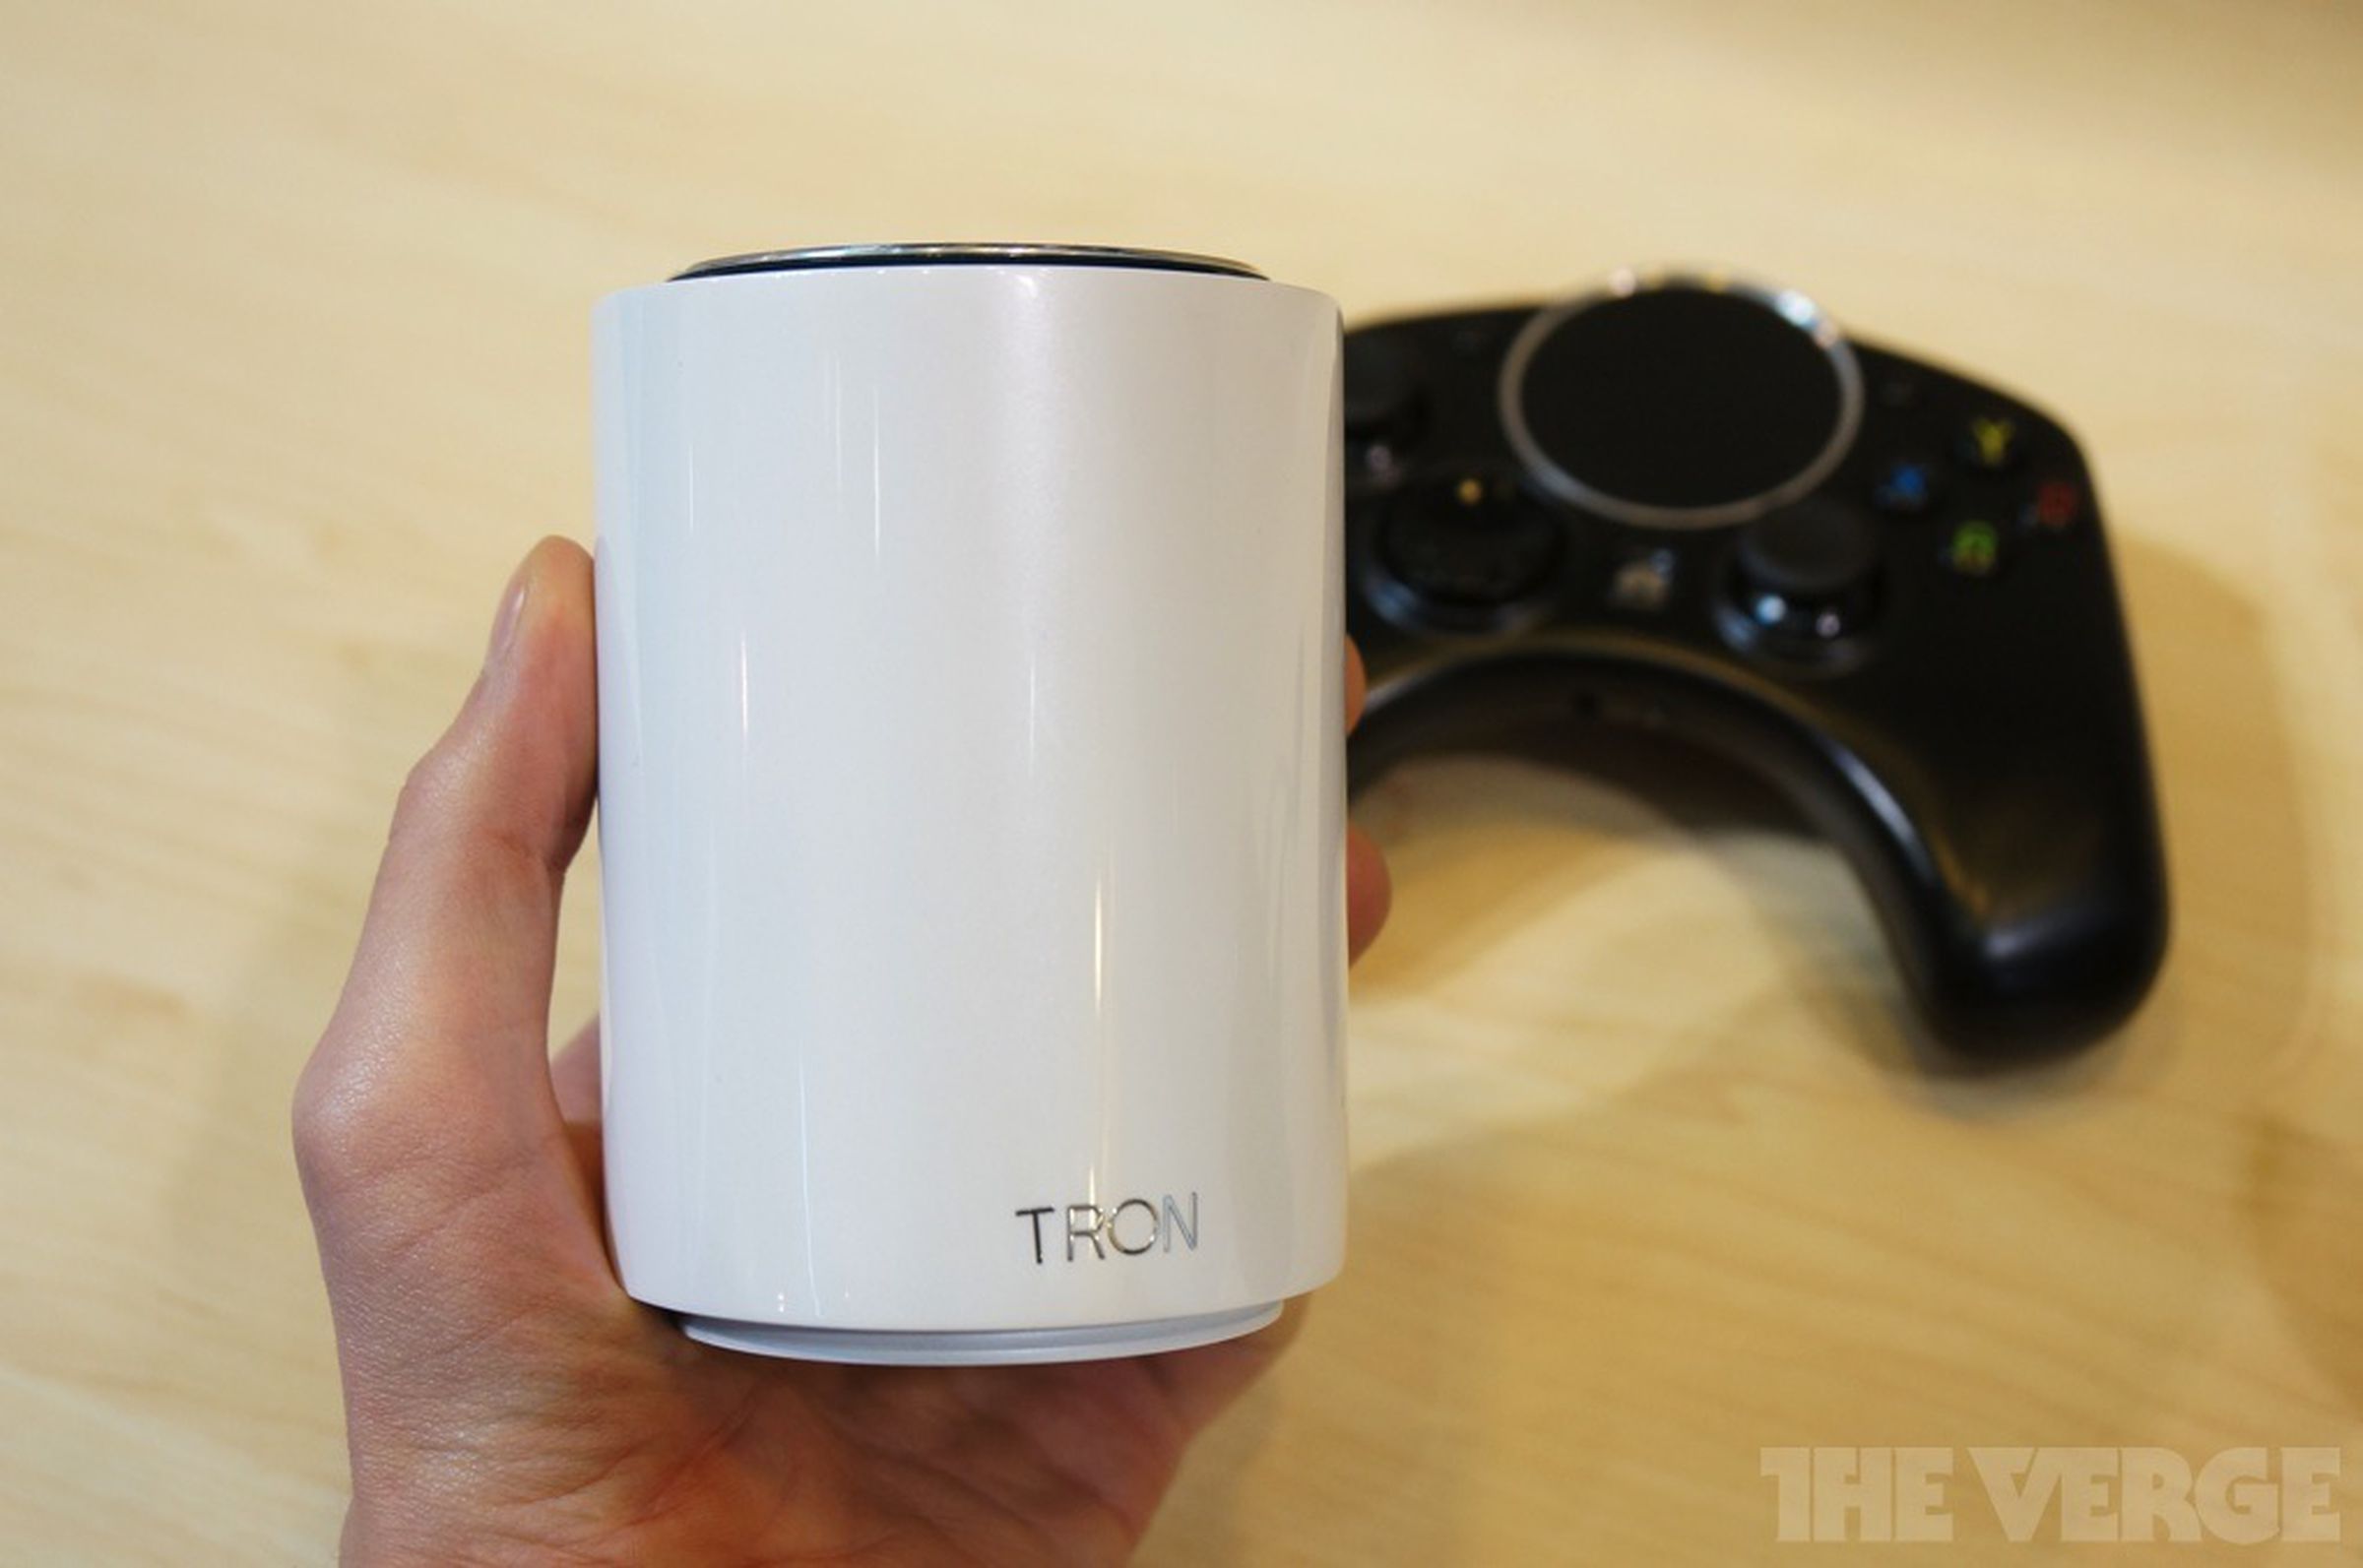 Huawei Tron Android console hands-on